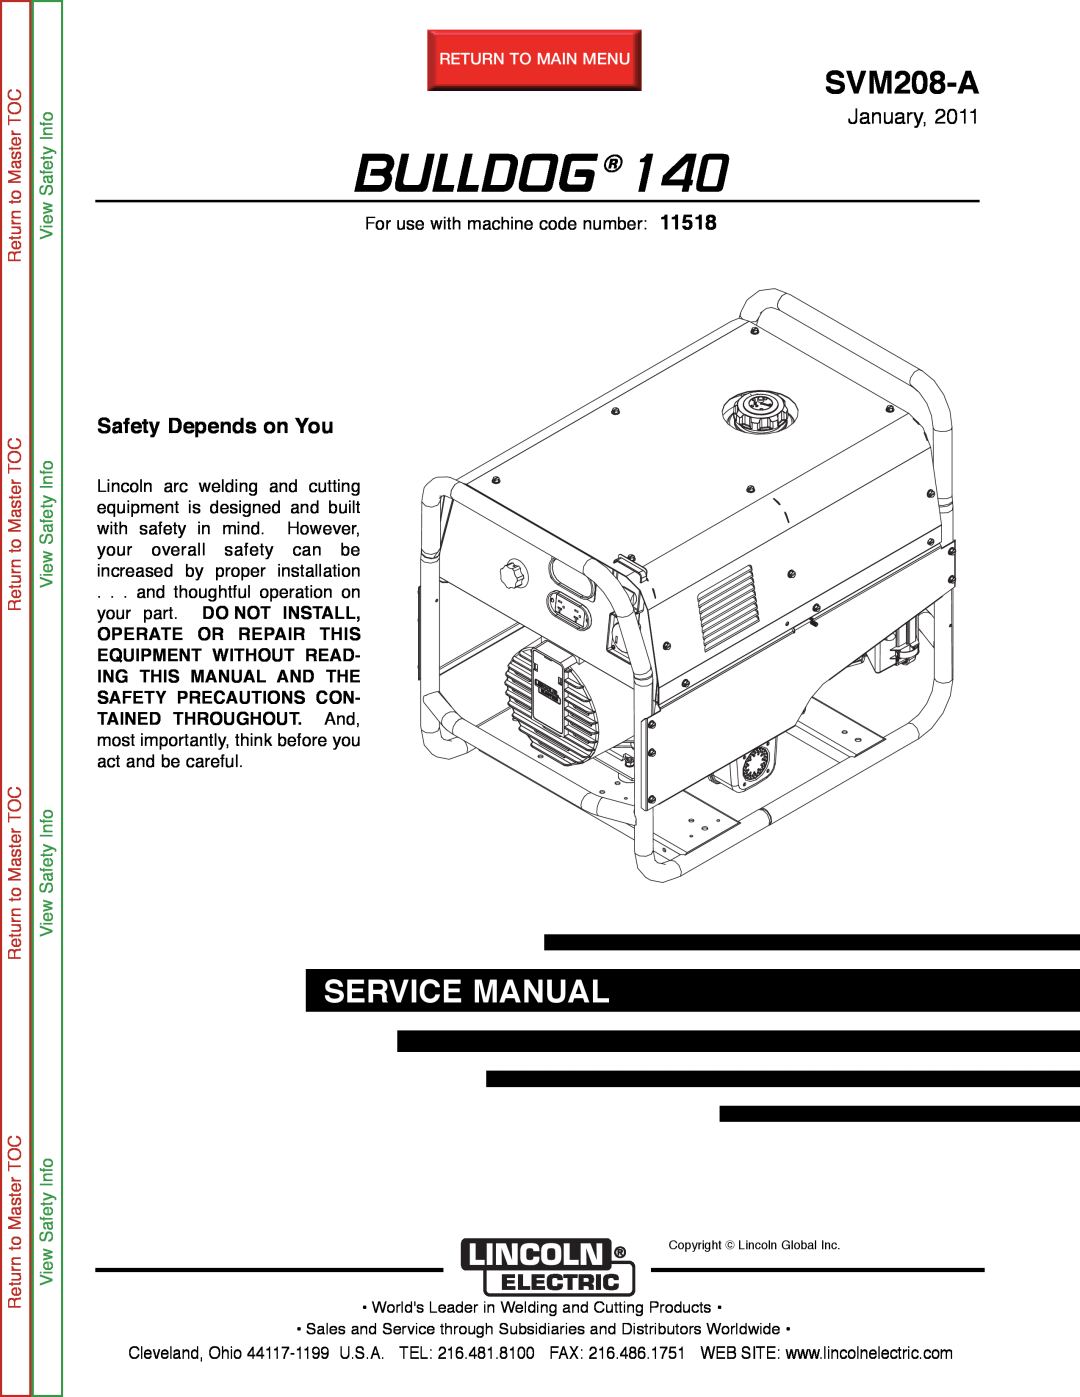 Lincoln Electric SVM208-A service manual January, Safety Depends on You, Bulldog, Service Manual, Return to Master TOC 